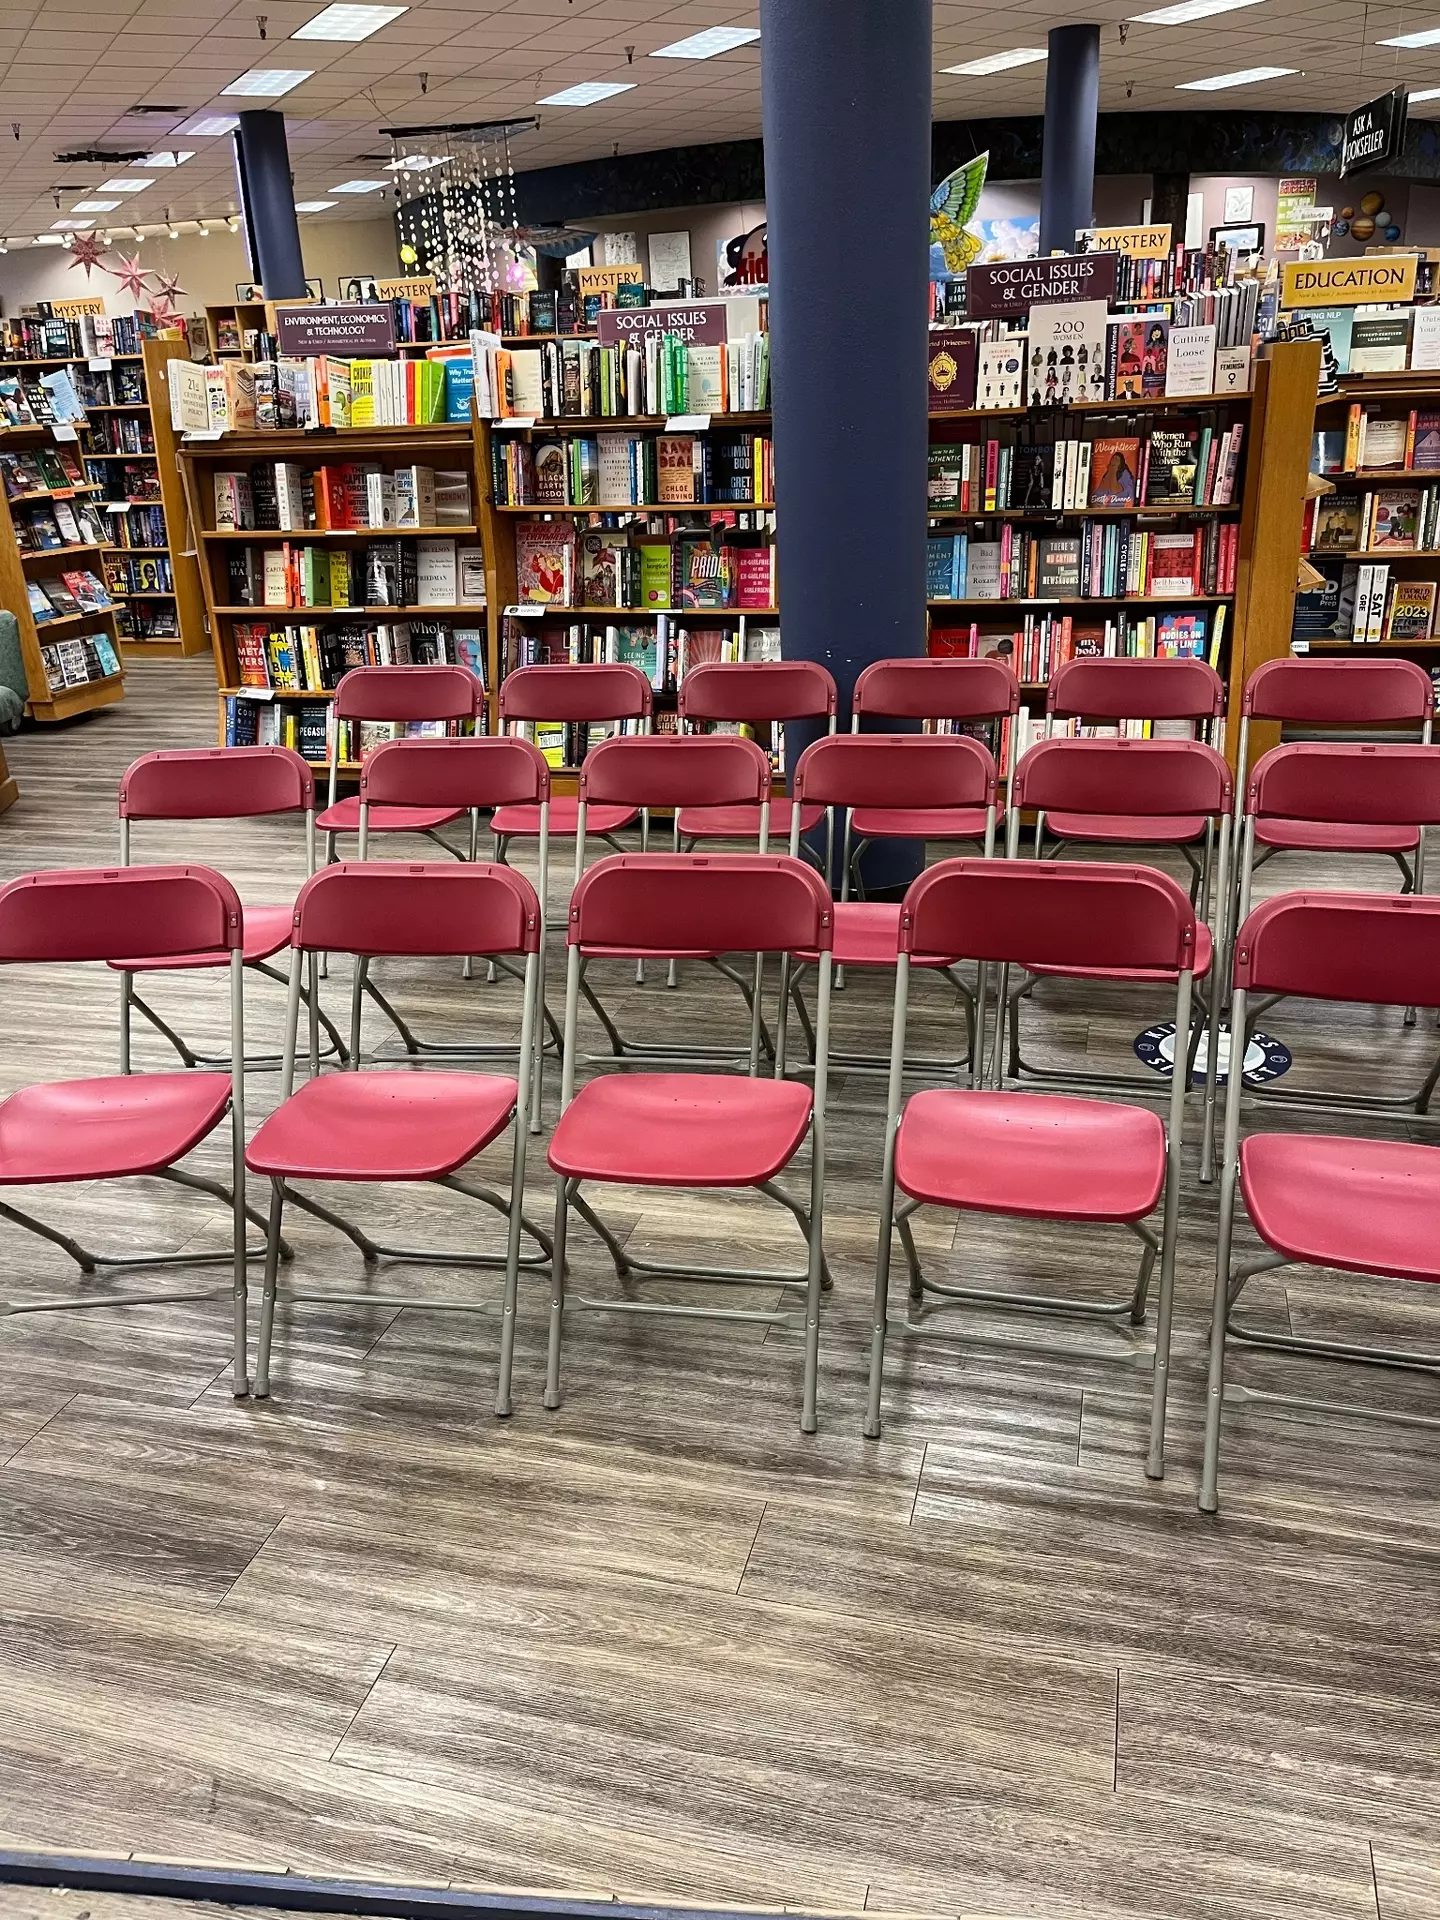 Nobody showed up for the signing of Suzanne Young's new book.